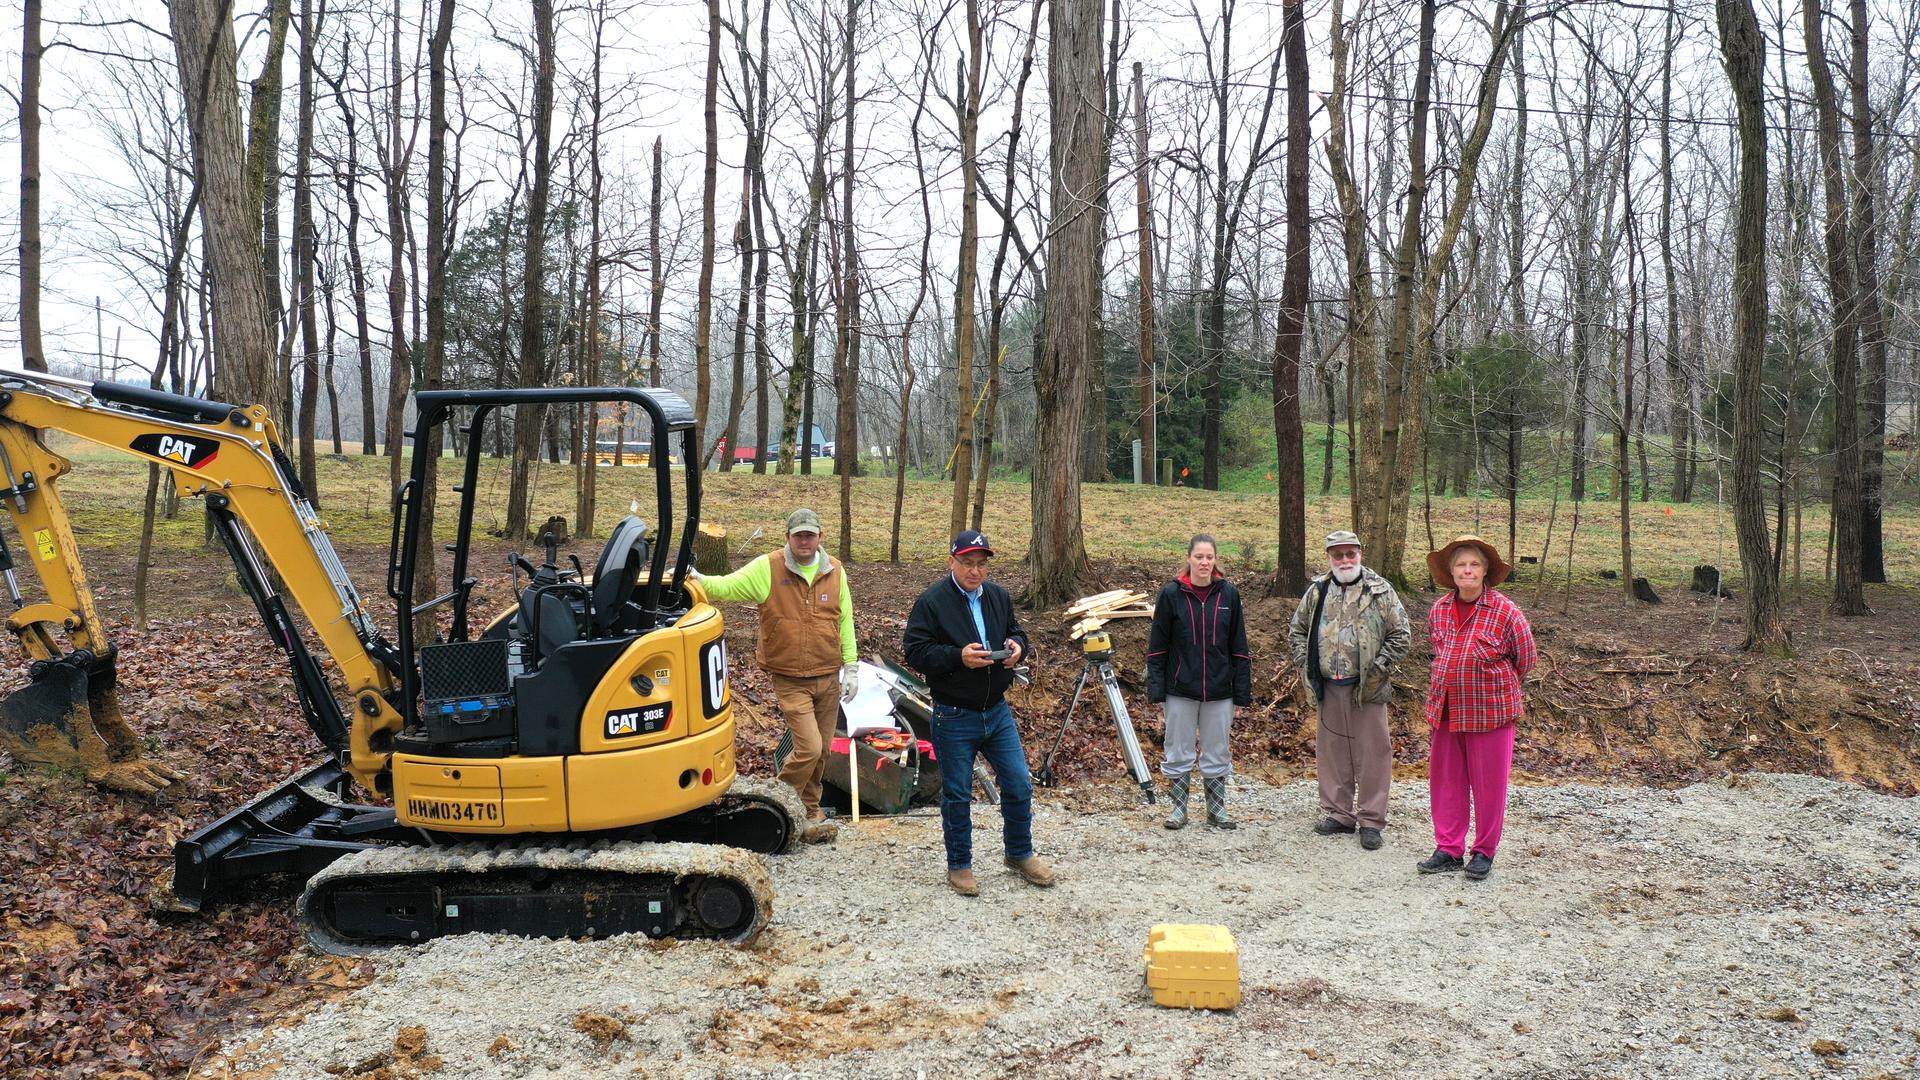 Crew from Monolithic Constructors, inc. and soon-to-be dome home owners standing at the site of their new home.